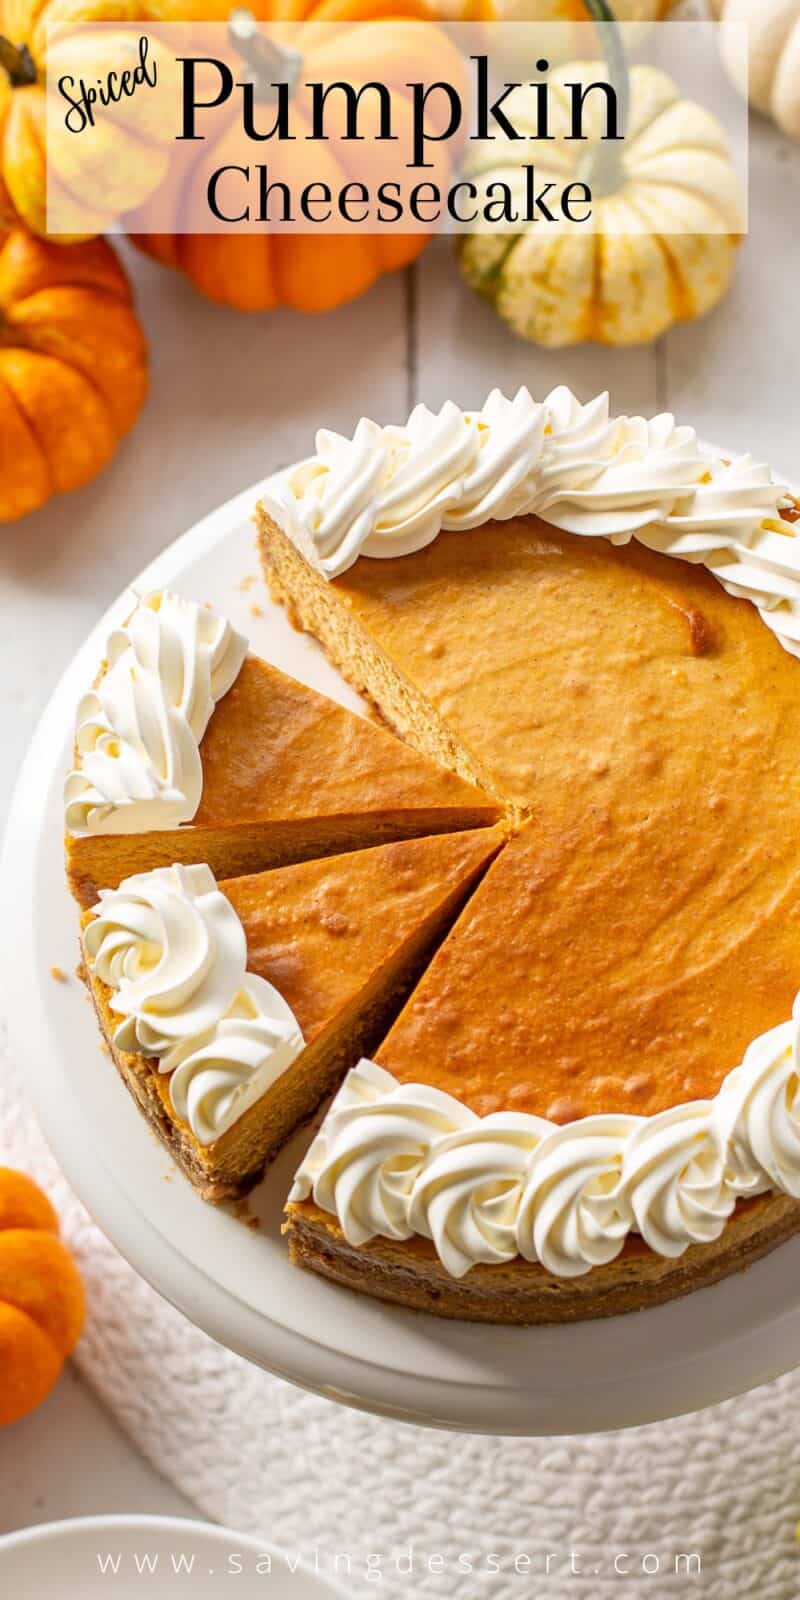 Overhead view of a sliced pumpkin cheesecake decorated with swirls of whipped cream